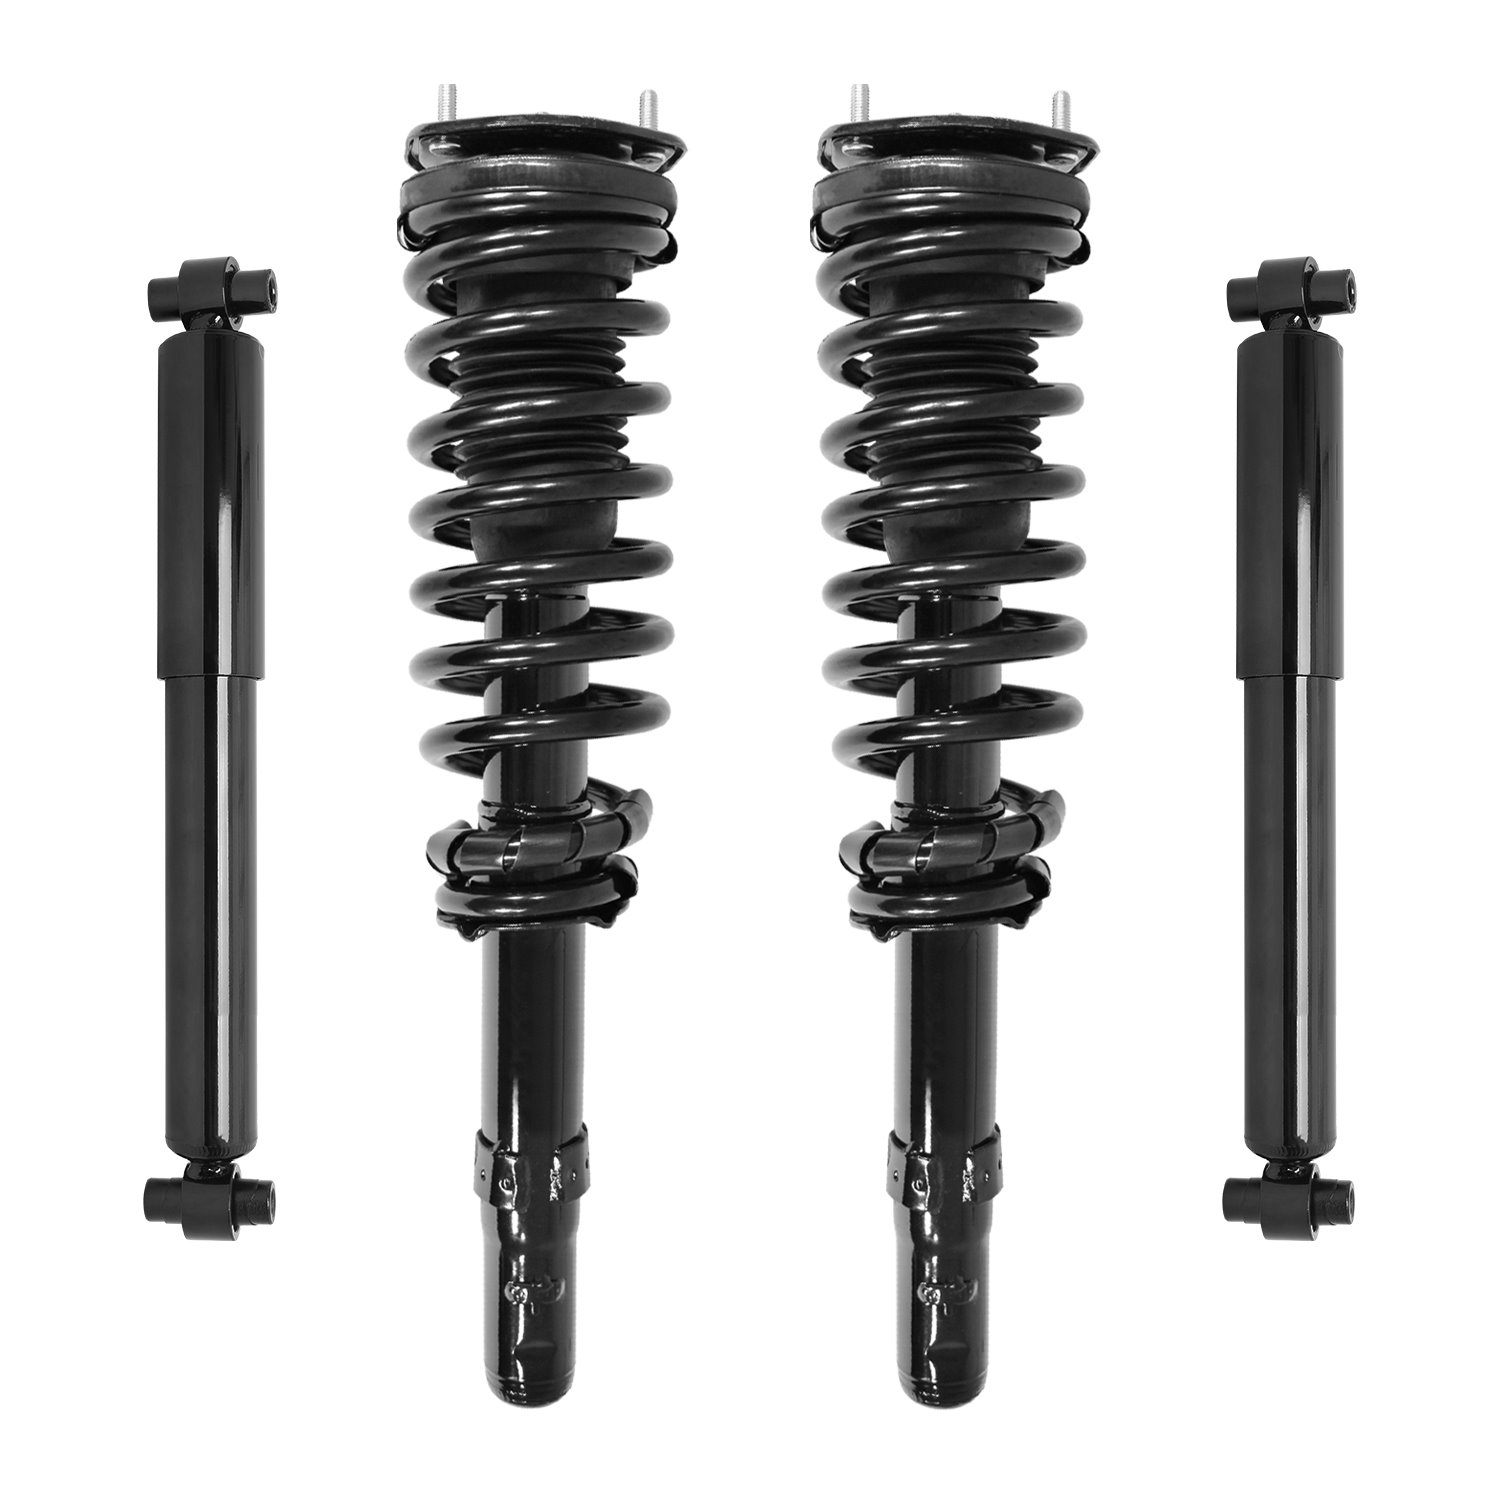 4-11990-252080-001 Front & Rear Suspension Strut & Coil Spring Assembly Fits Select Ford/Lincoln/Mercury